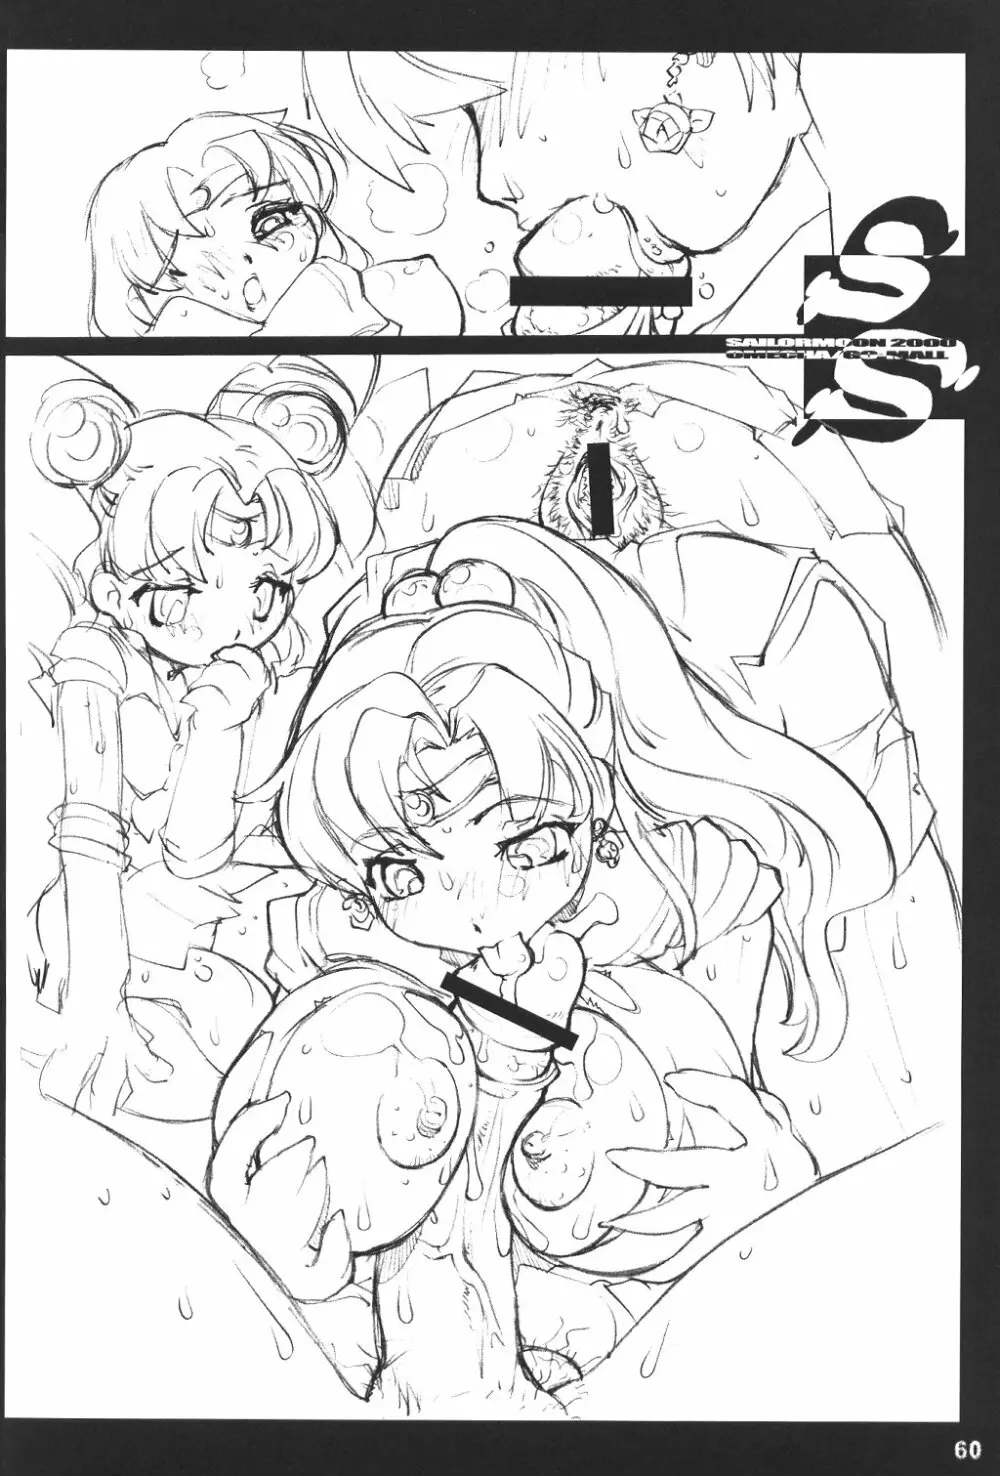 MaD ArtistS SailoR MooN Page.59